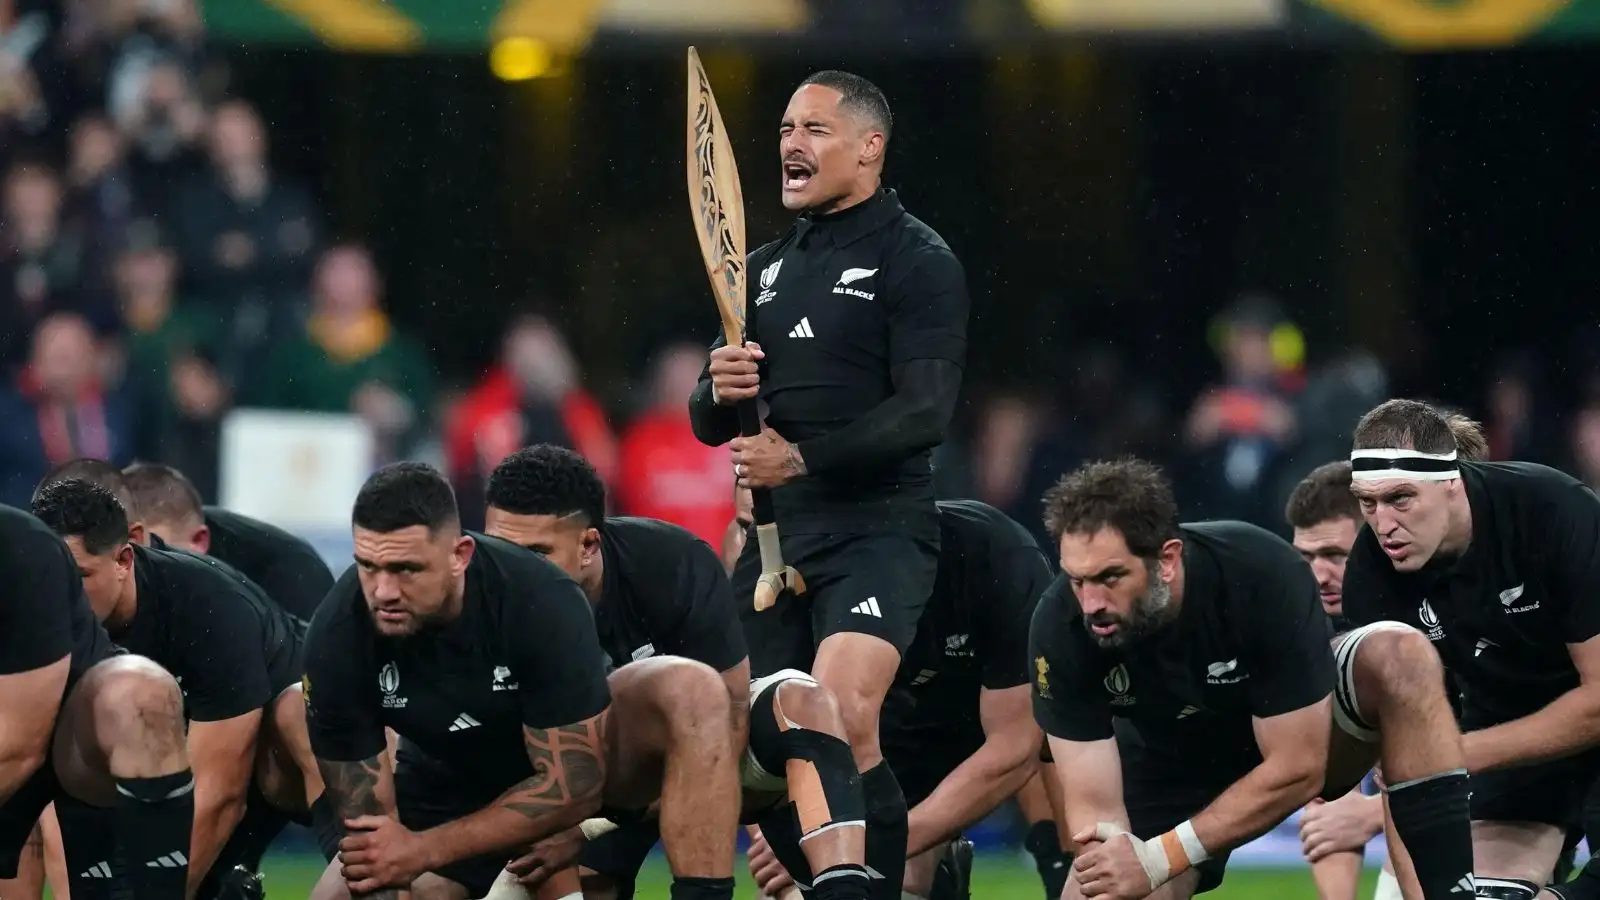 All Blacks Aaron Smith leads the Haka before the Rugby World Cup 2023 final match at the Stade de France in Paris, France.